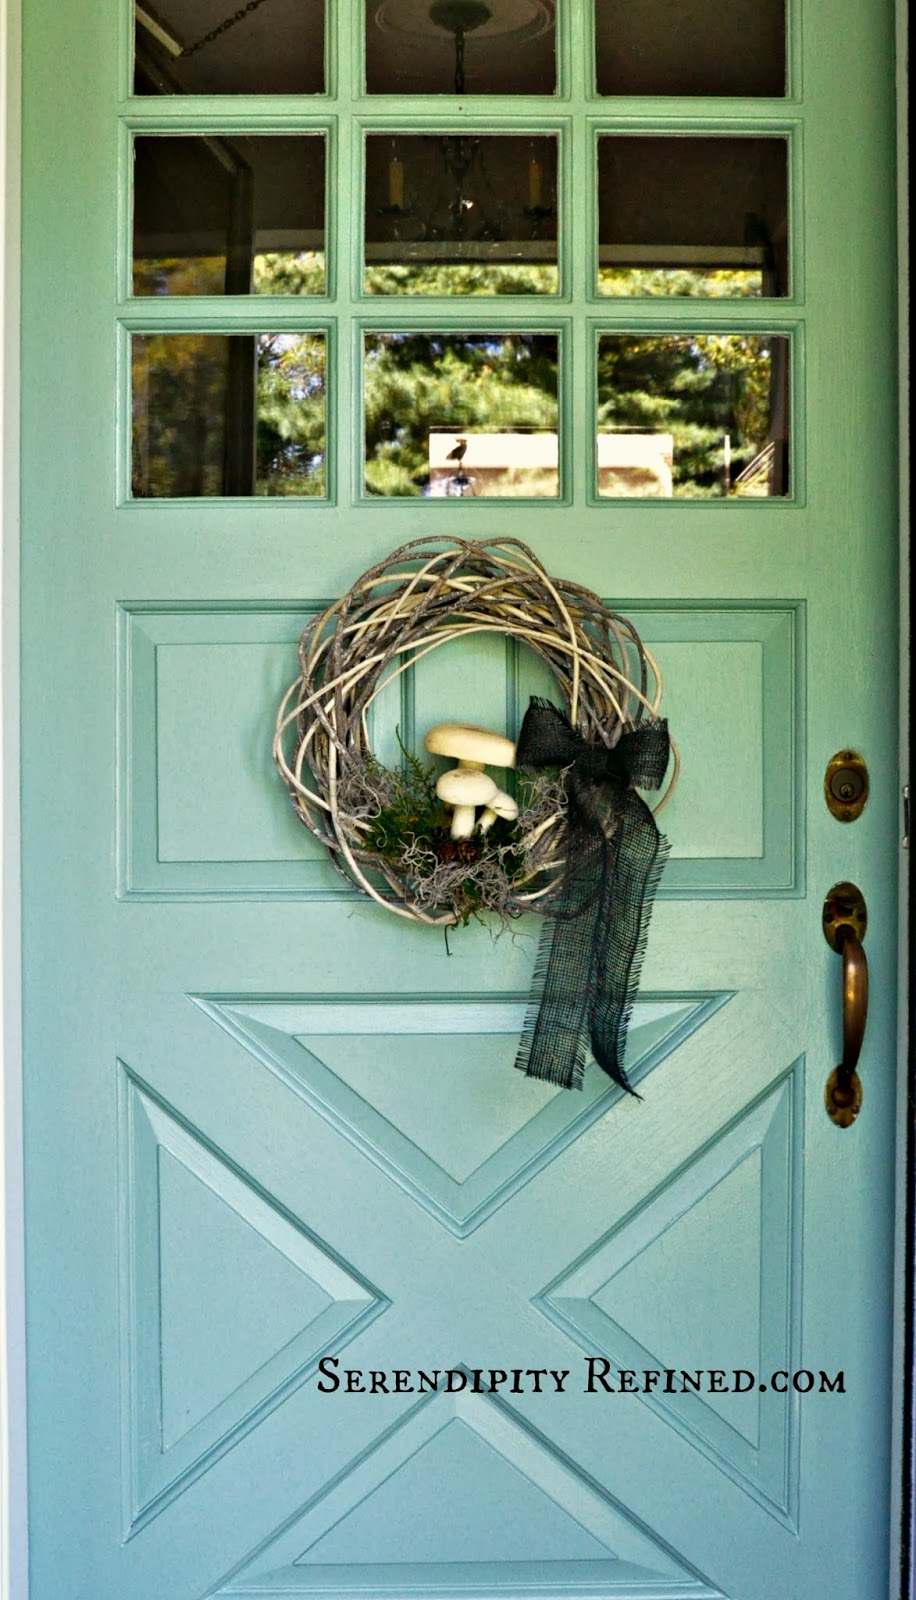 Serendipity Refined: Rustic Natural Fall Grapevine Wreath ...